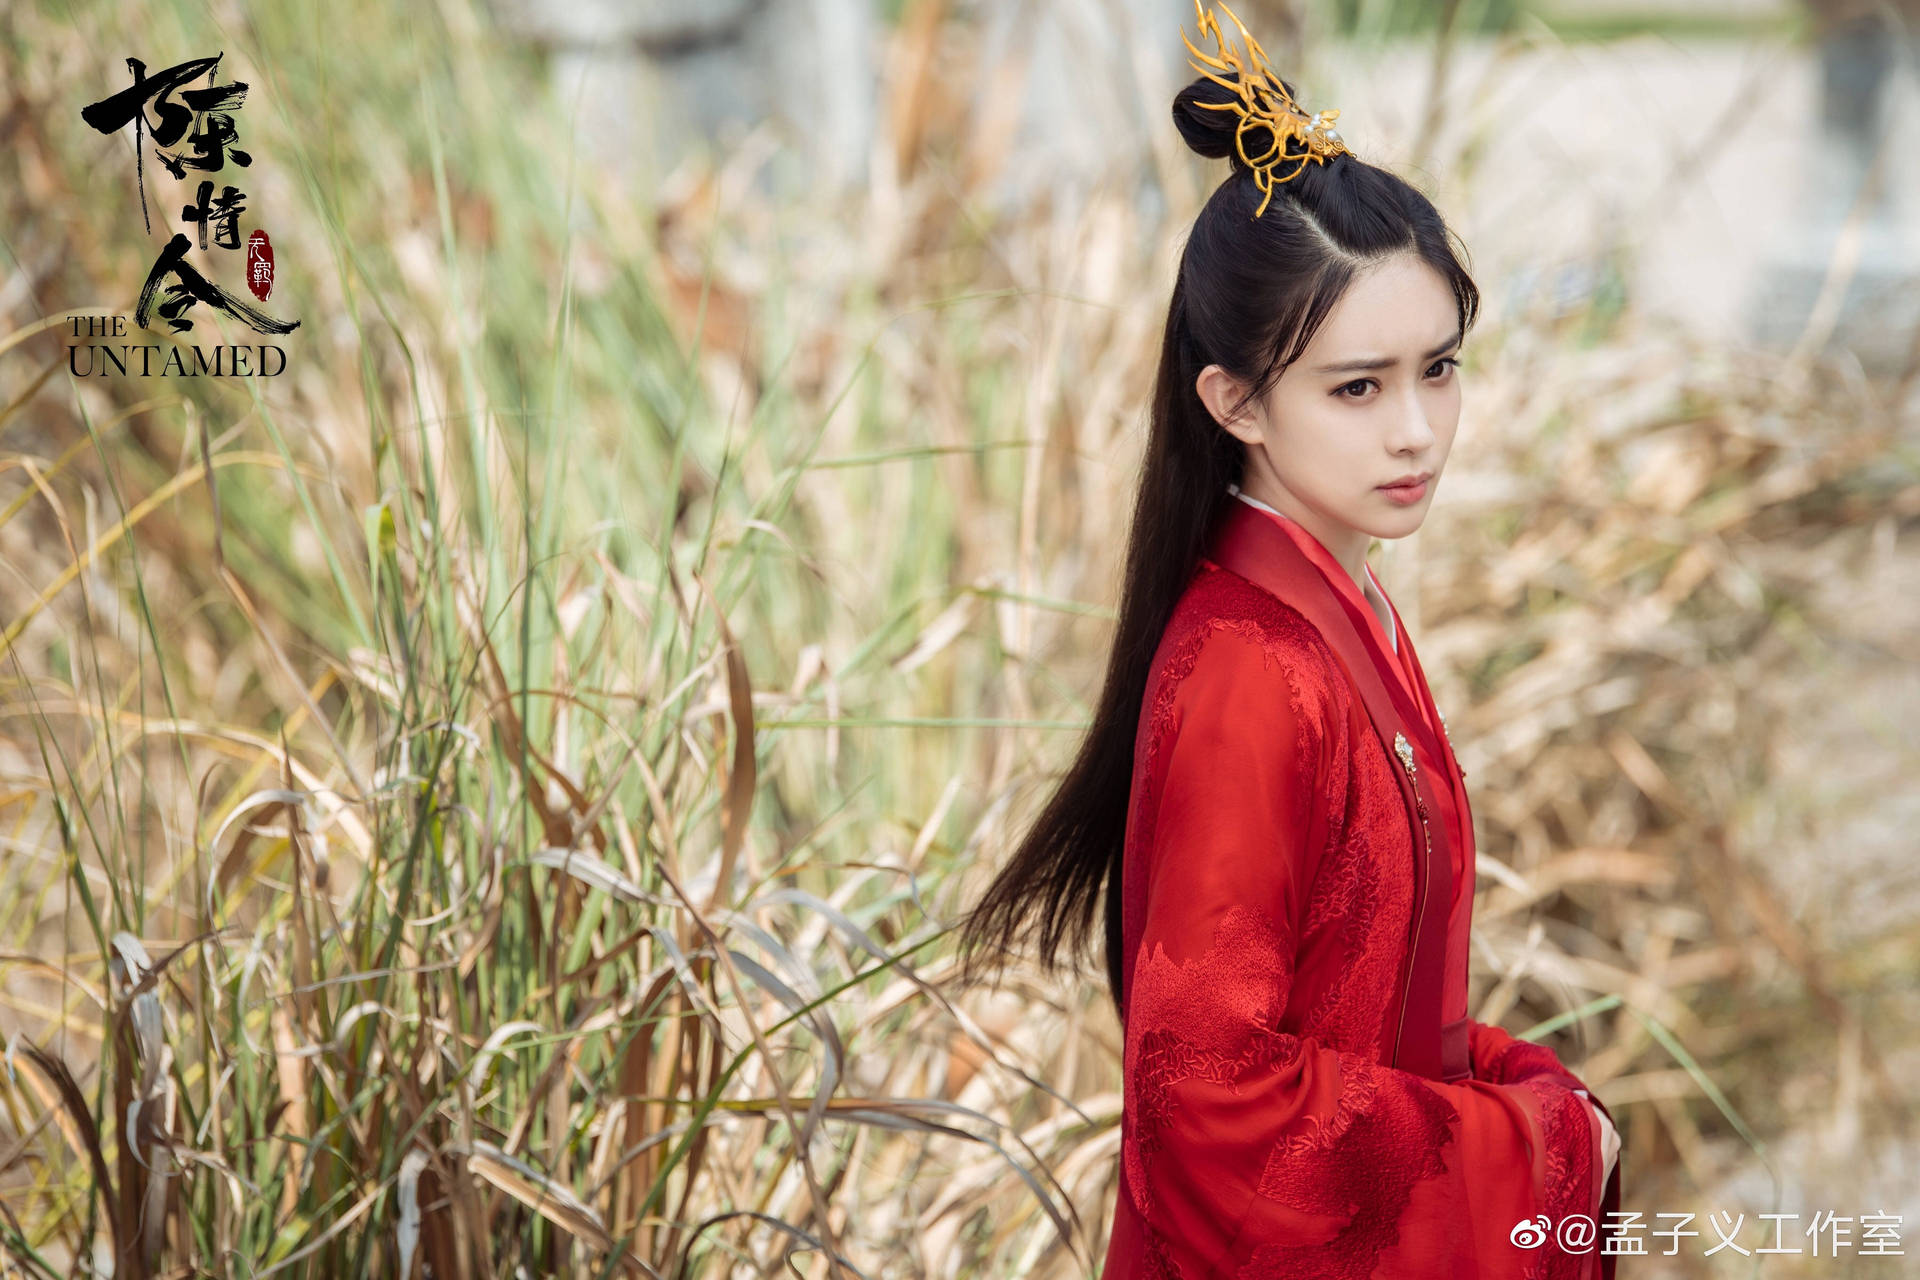 The Untamed Wen Qing Background